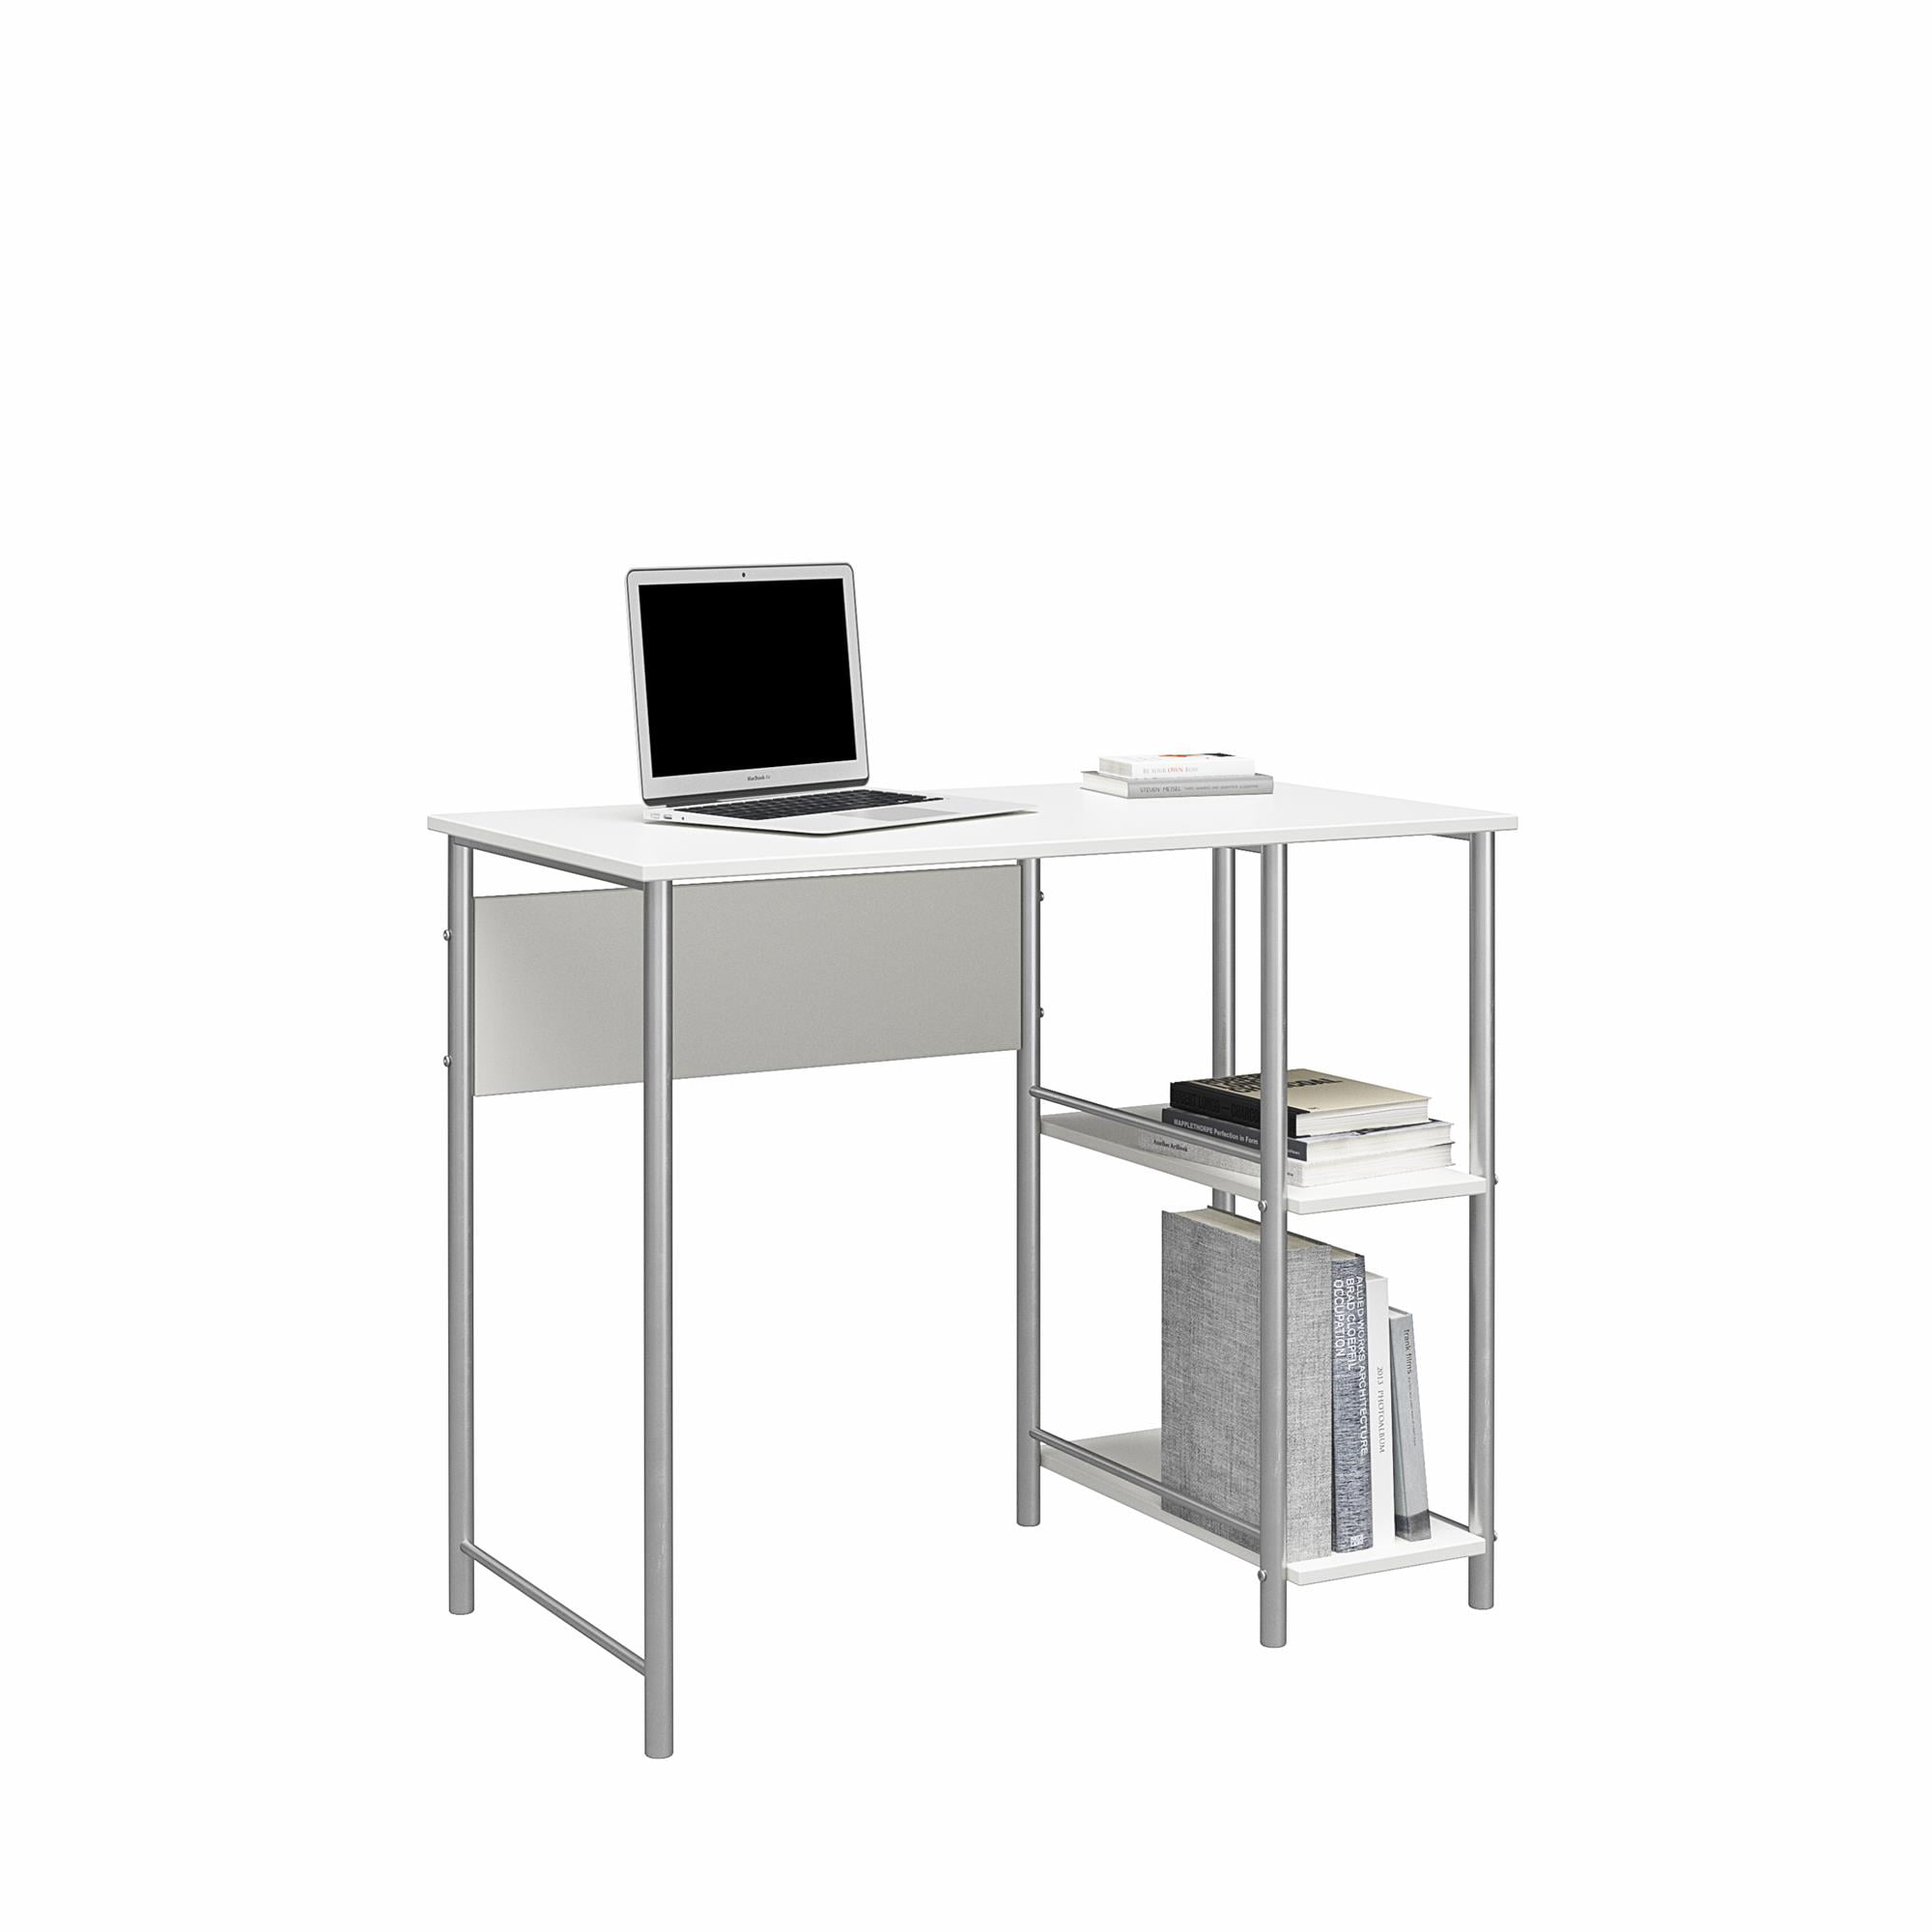 Mainstays Metal Student Computer Desk, White - image 5 of 8